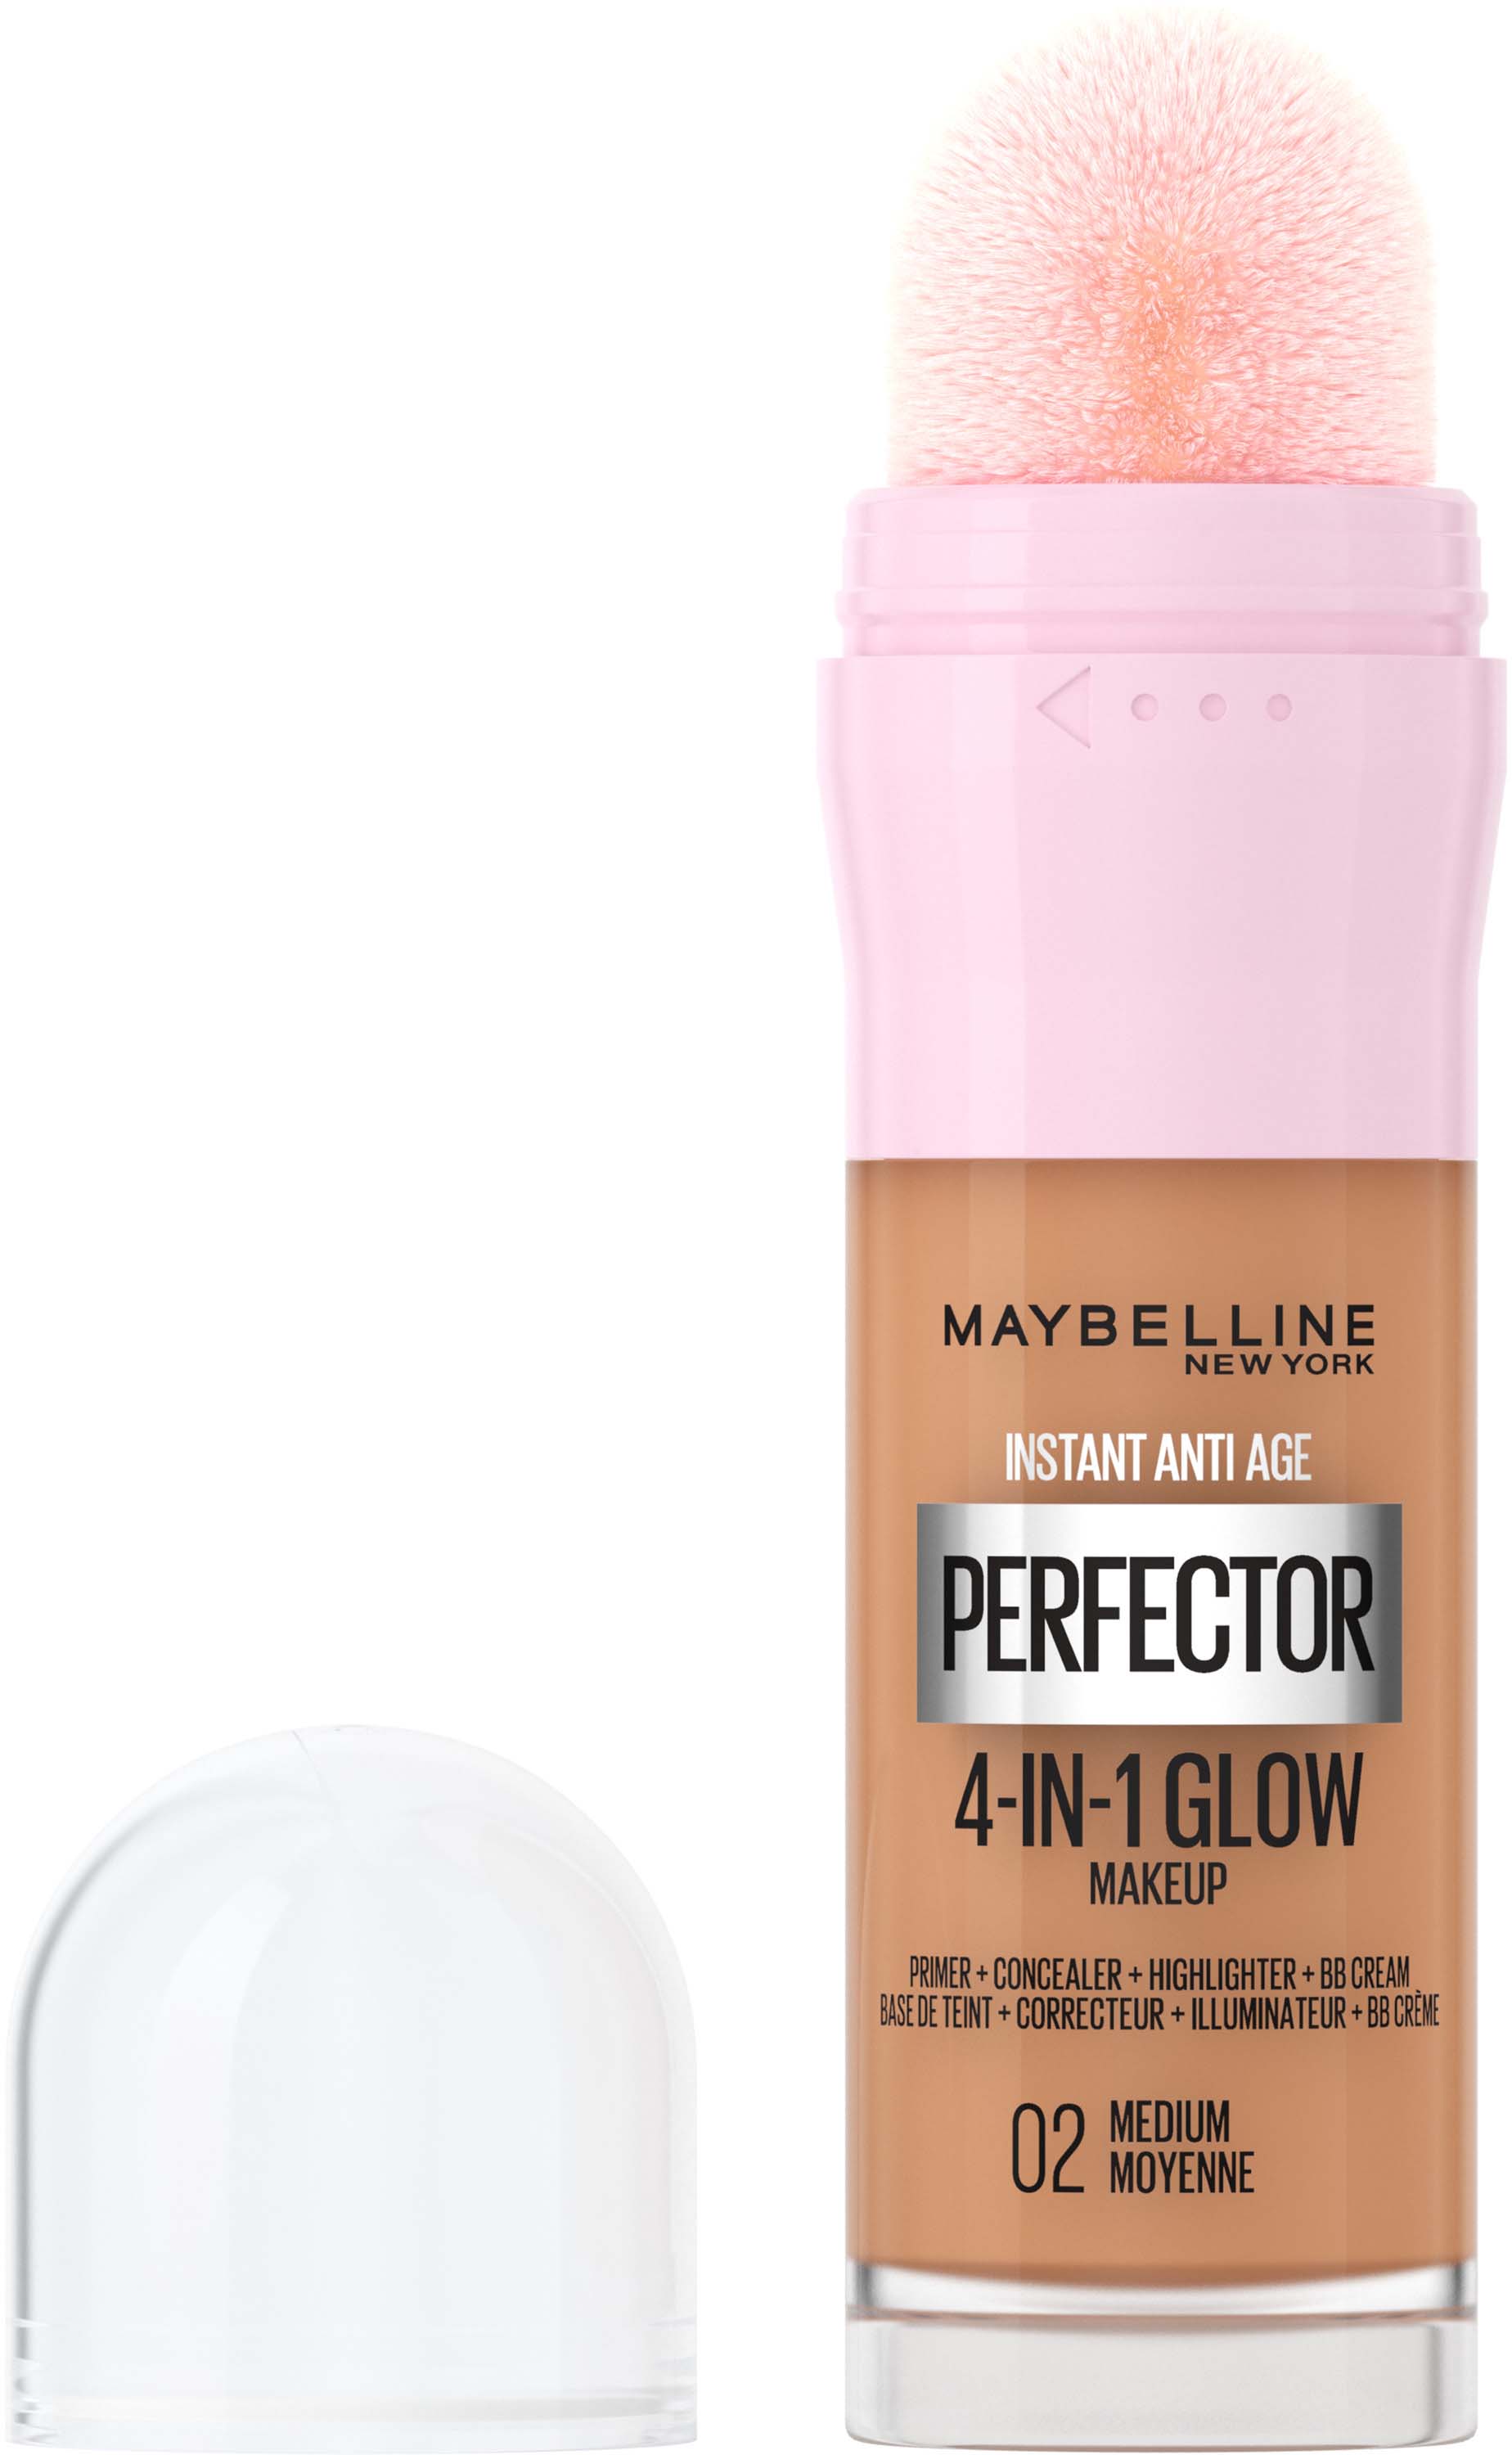 Maybelline New York Instant Anti-Age Perfector 4-in-1 Glow Makeup 03 Medium  Deep